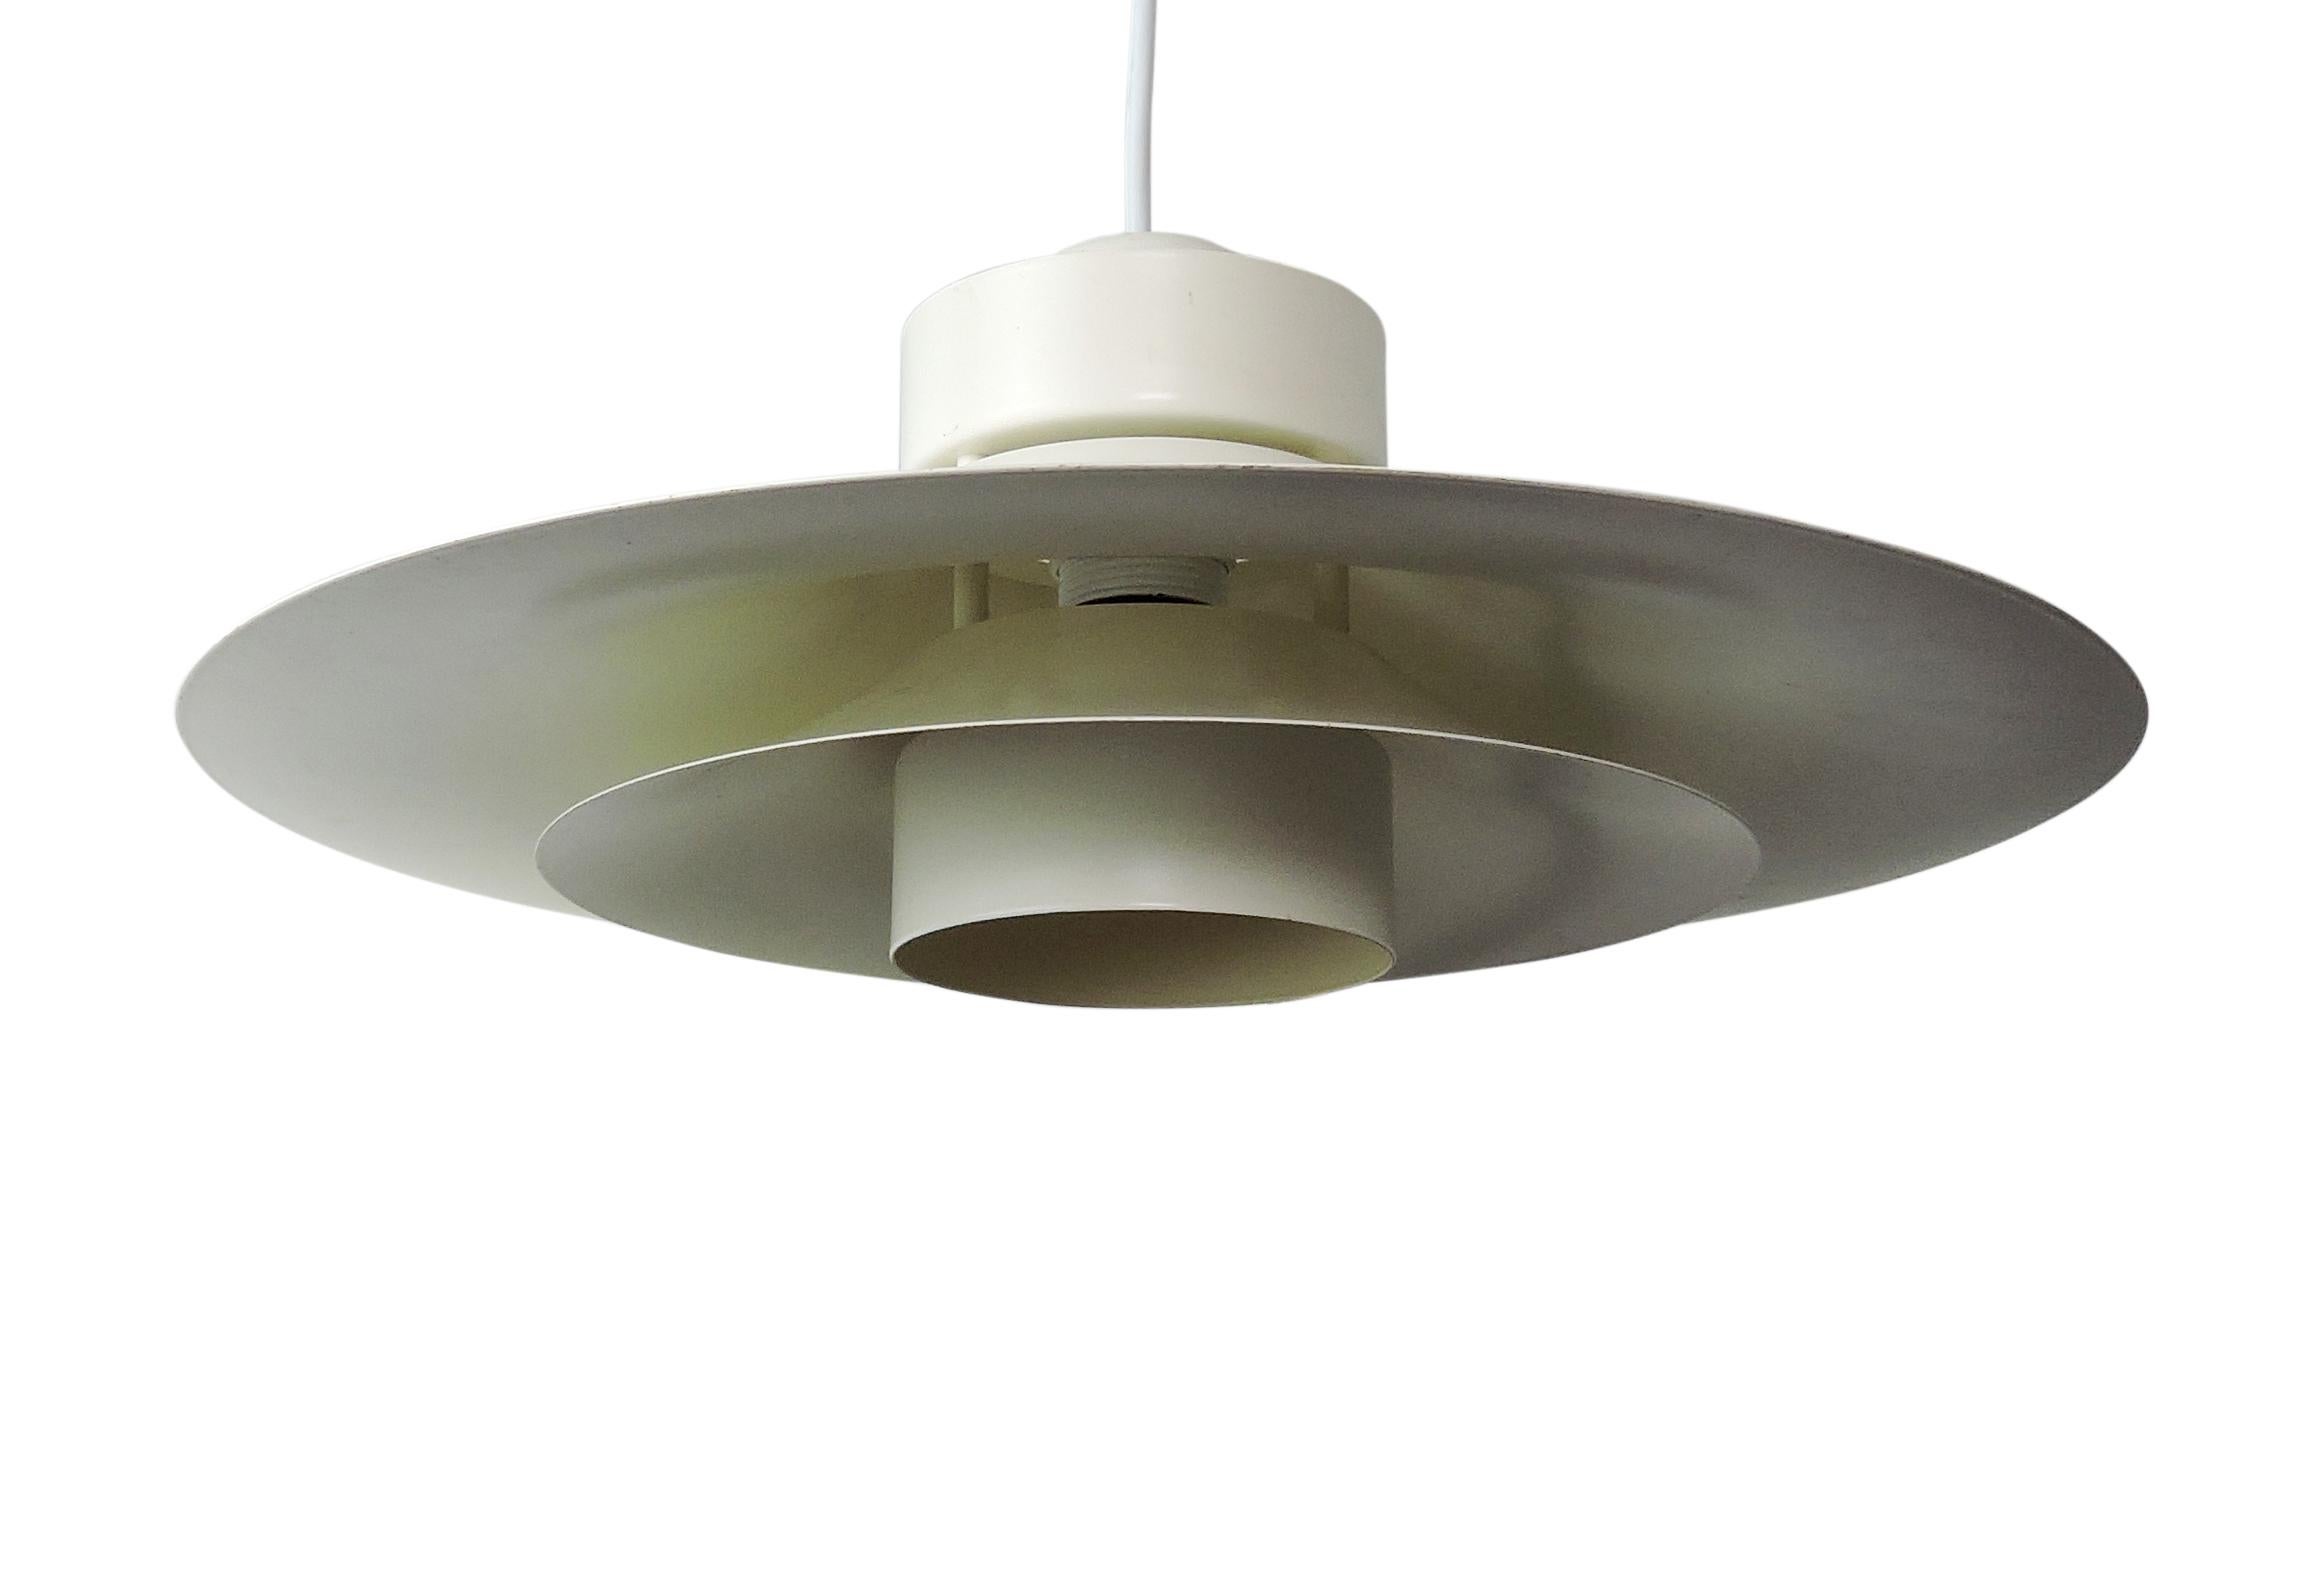 This Danish multi-layered pendant light was produced by Horn Lighting.